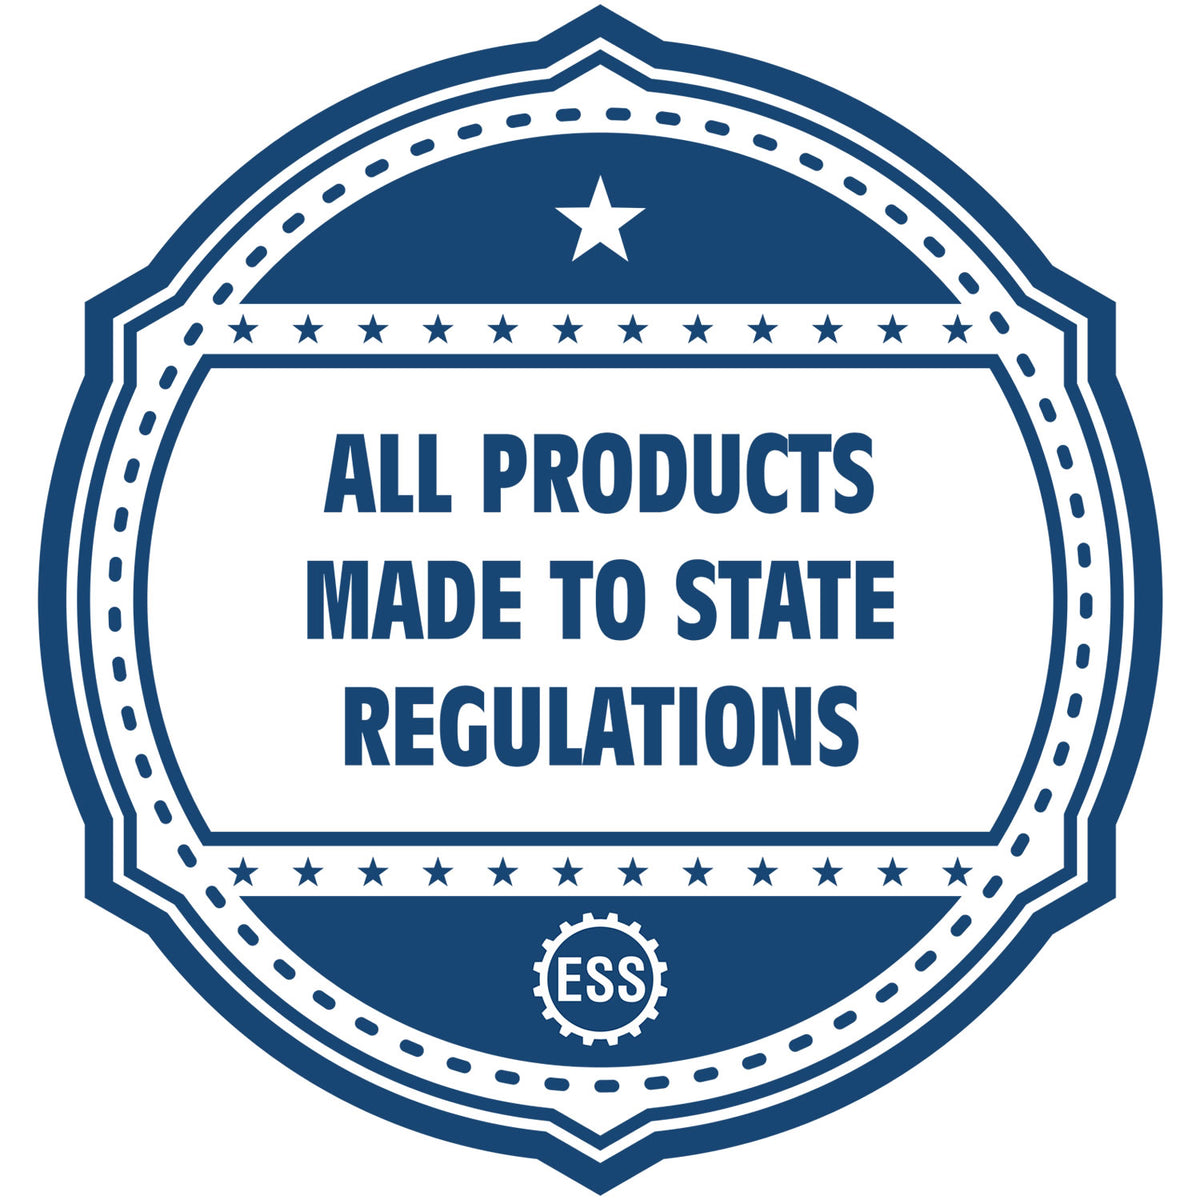 An icon or badge element for the Digital Maryland Landscape Architect Stamp showing that this product is made in compliance with state regulations.